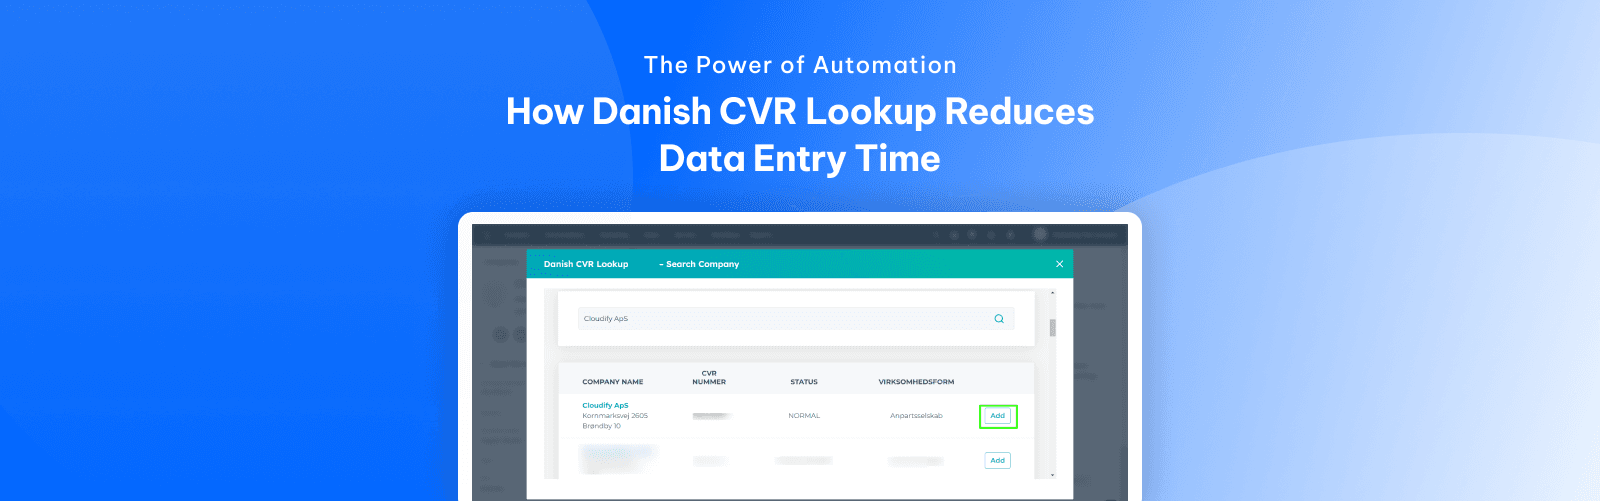 How Danish CVR Lookup Reduces Data Entry Time